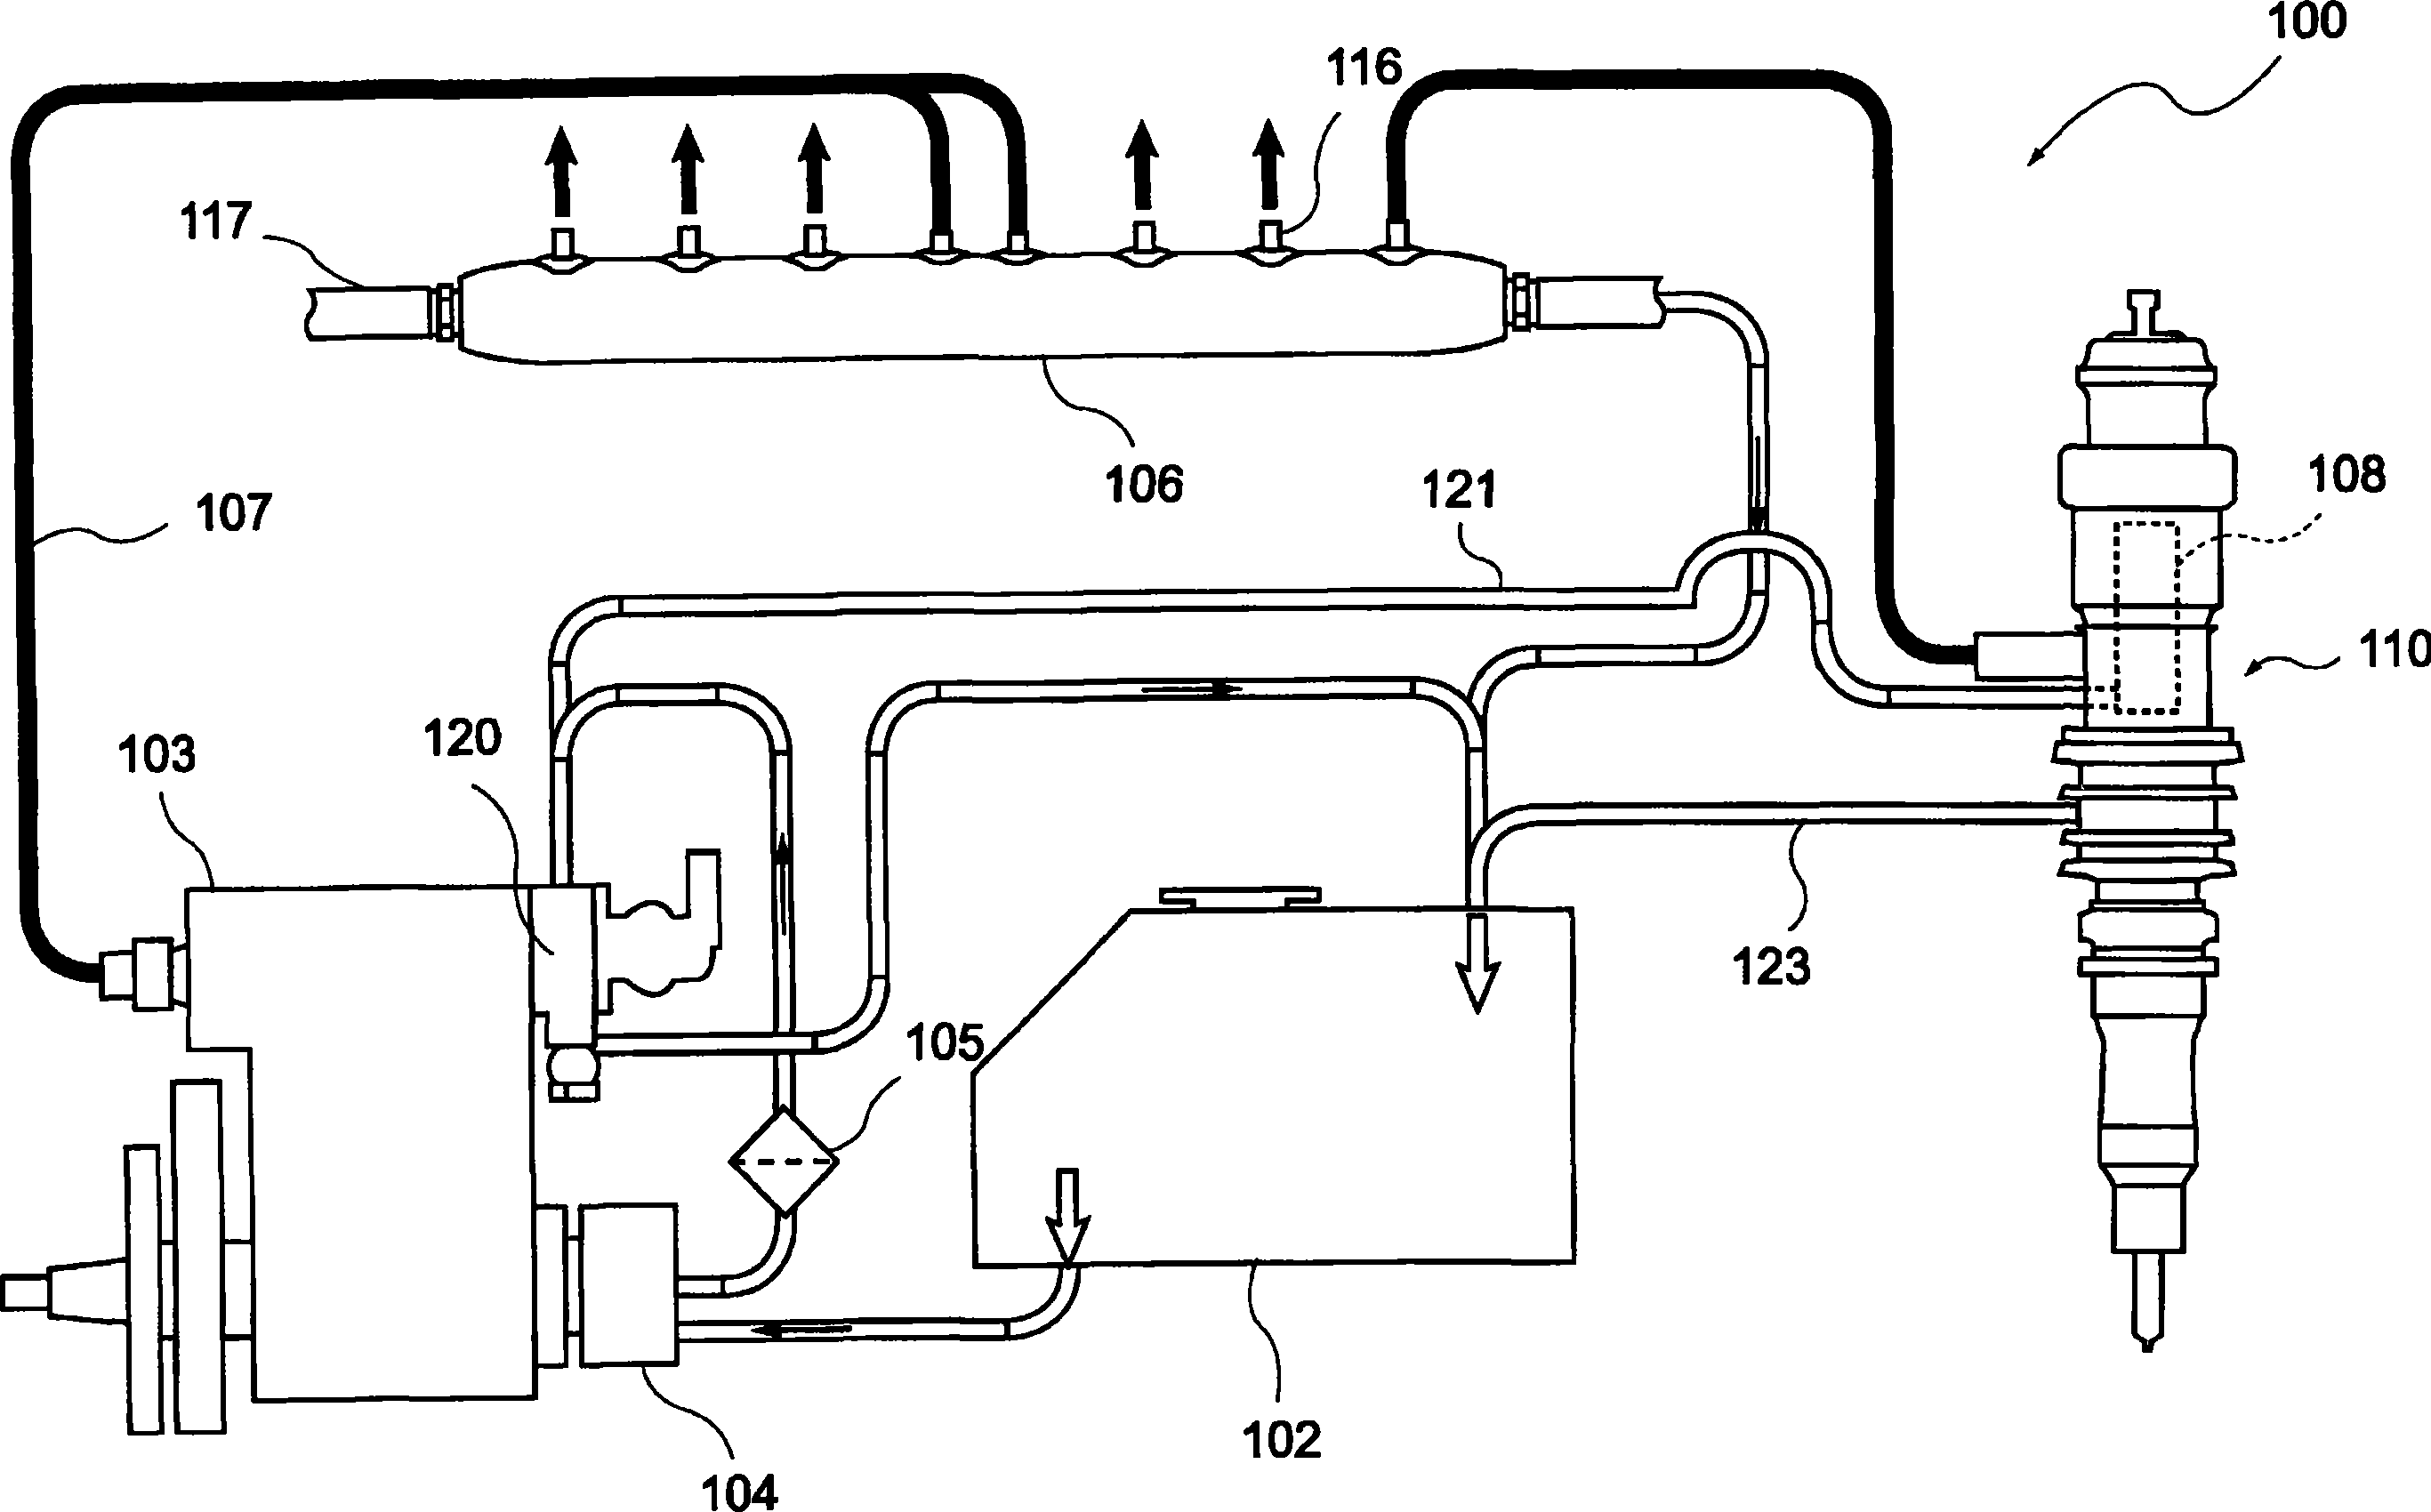 Fuel supply pump and tappet structure body